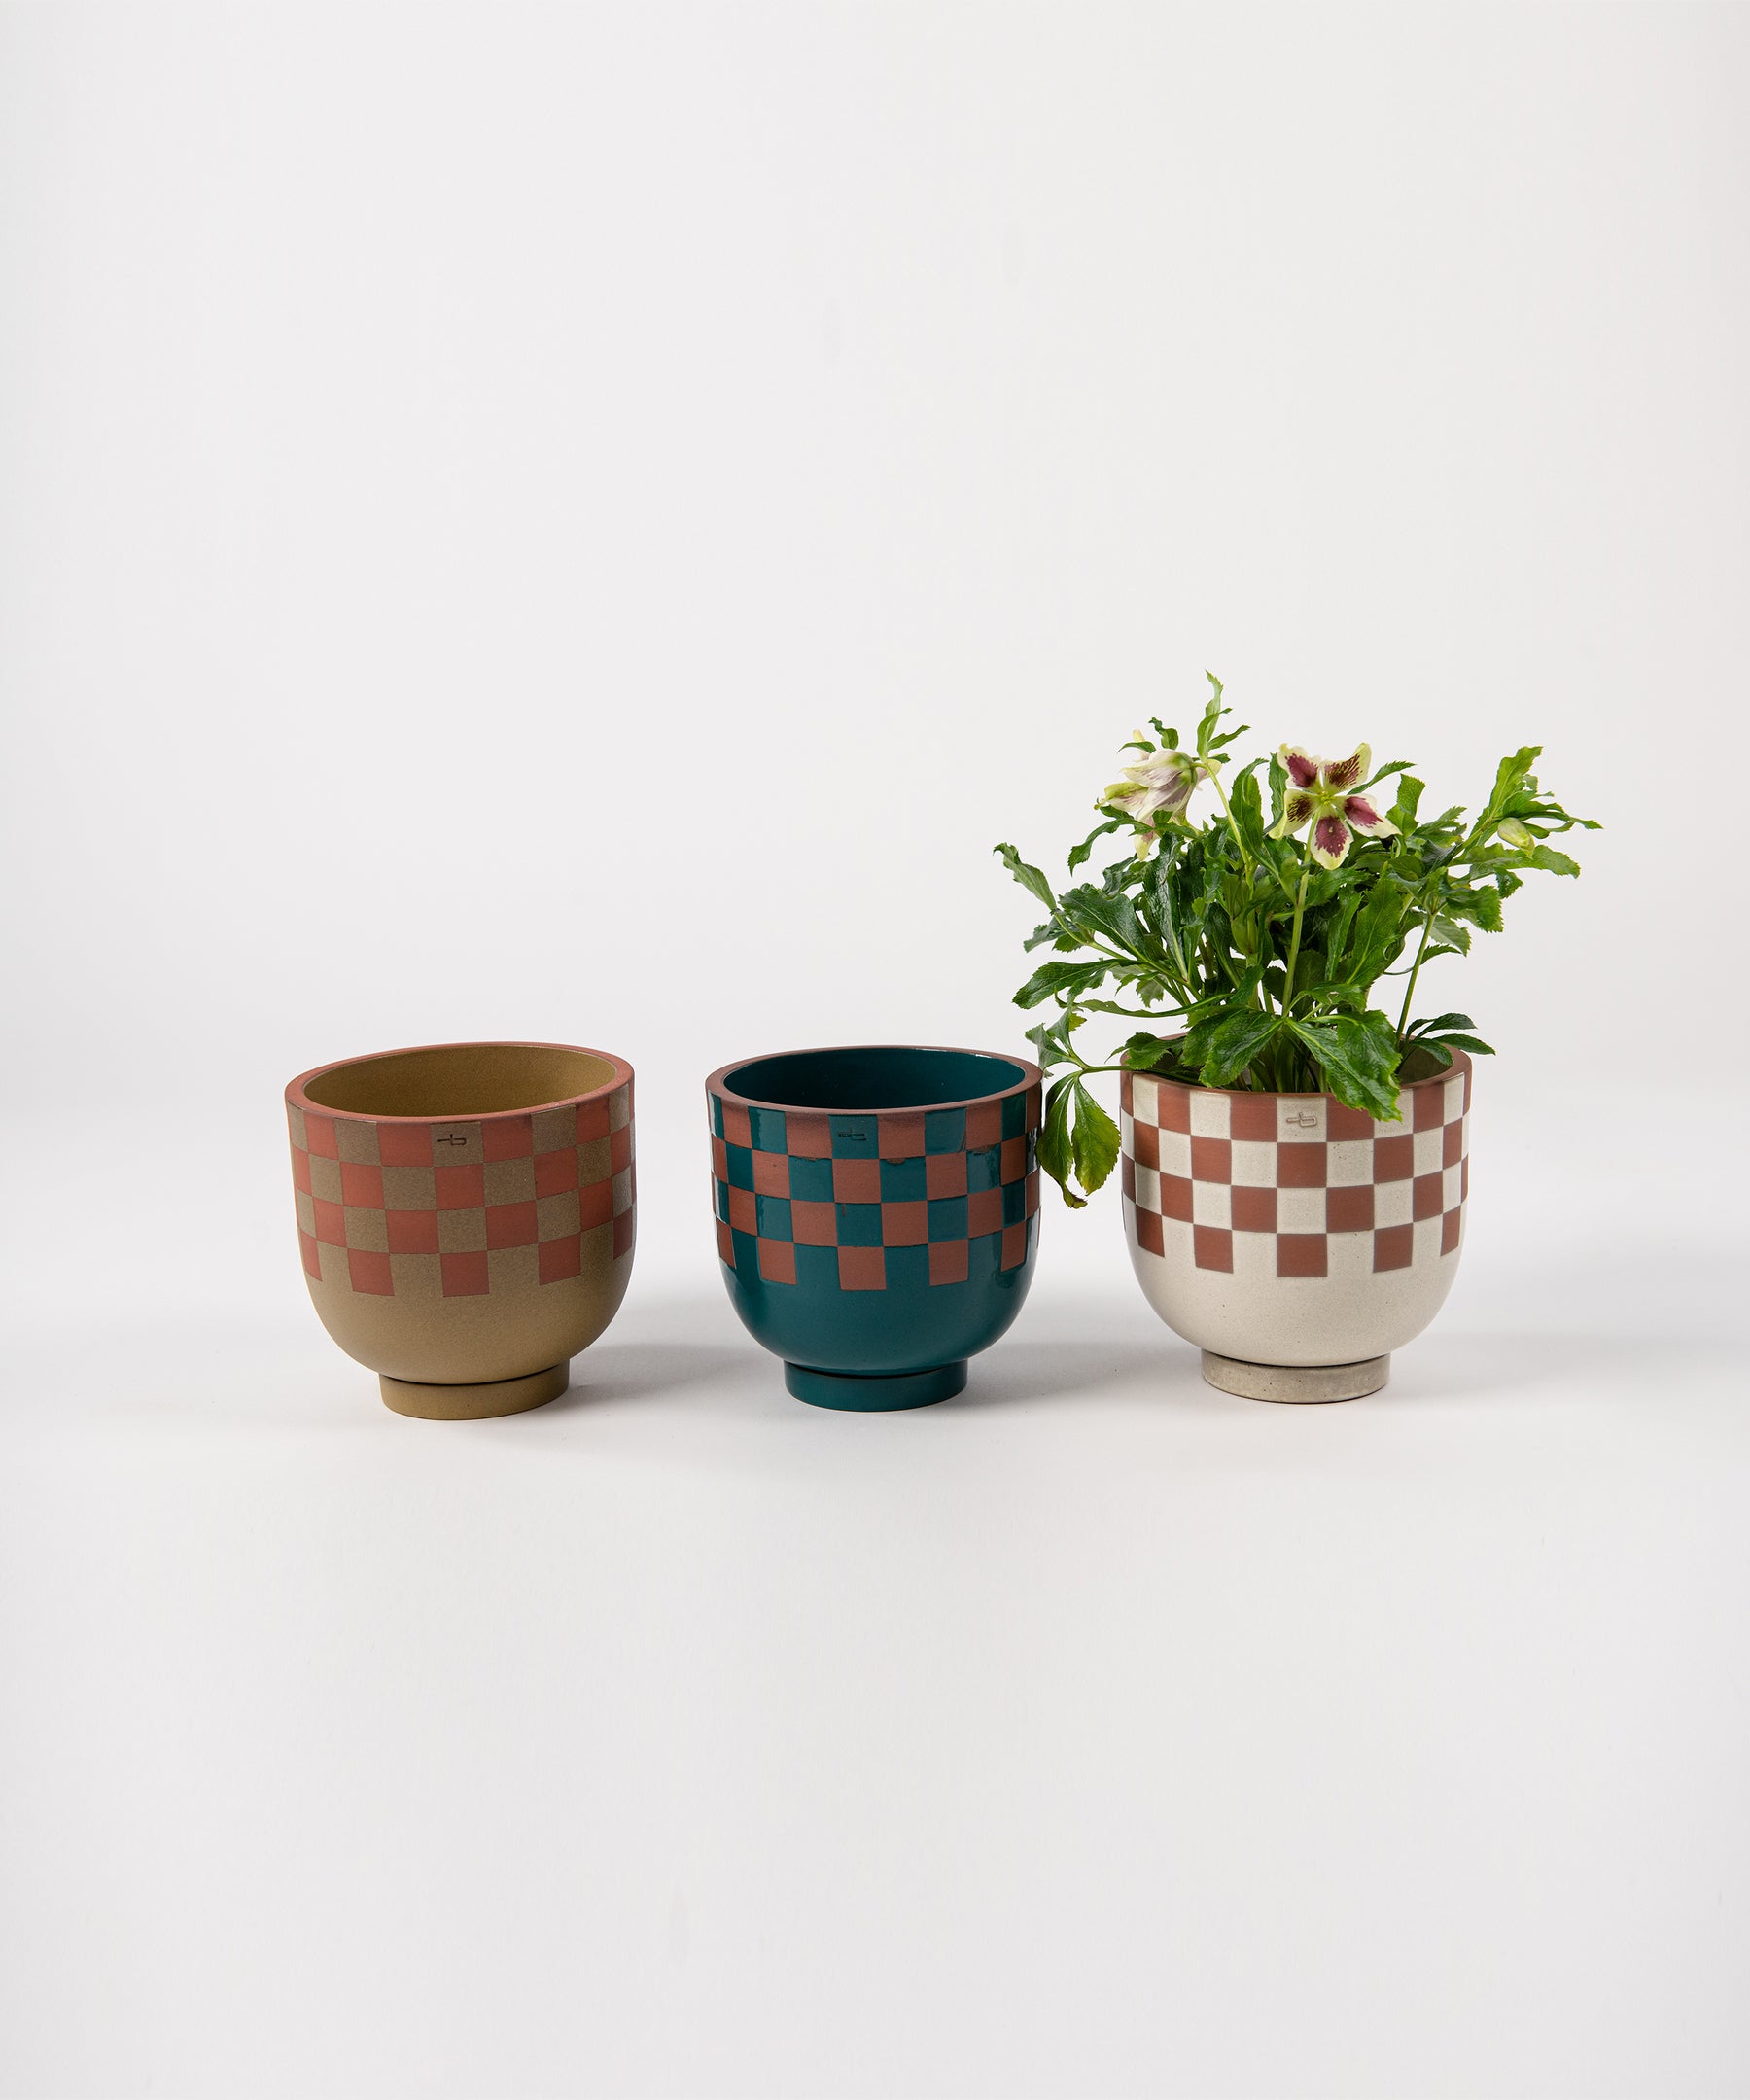 Terracotta and Check Pots